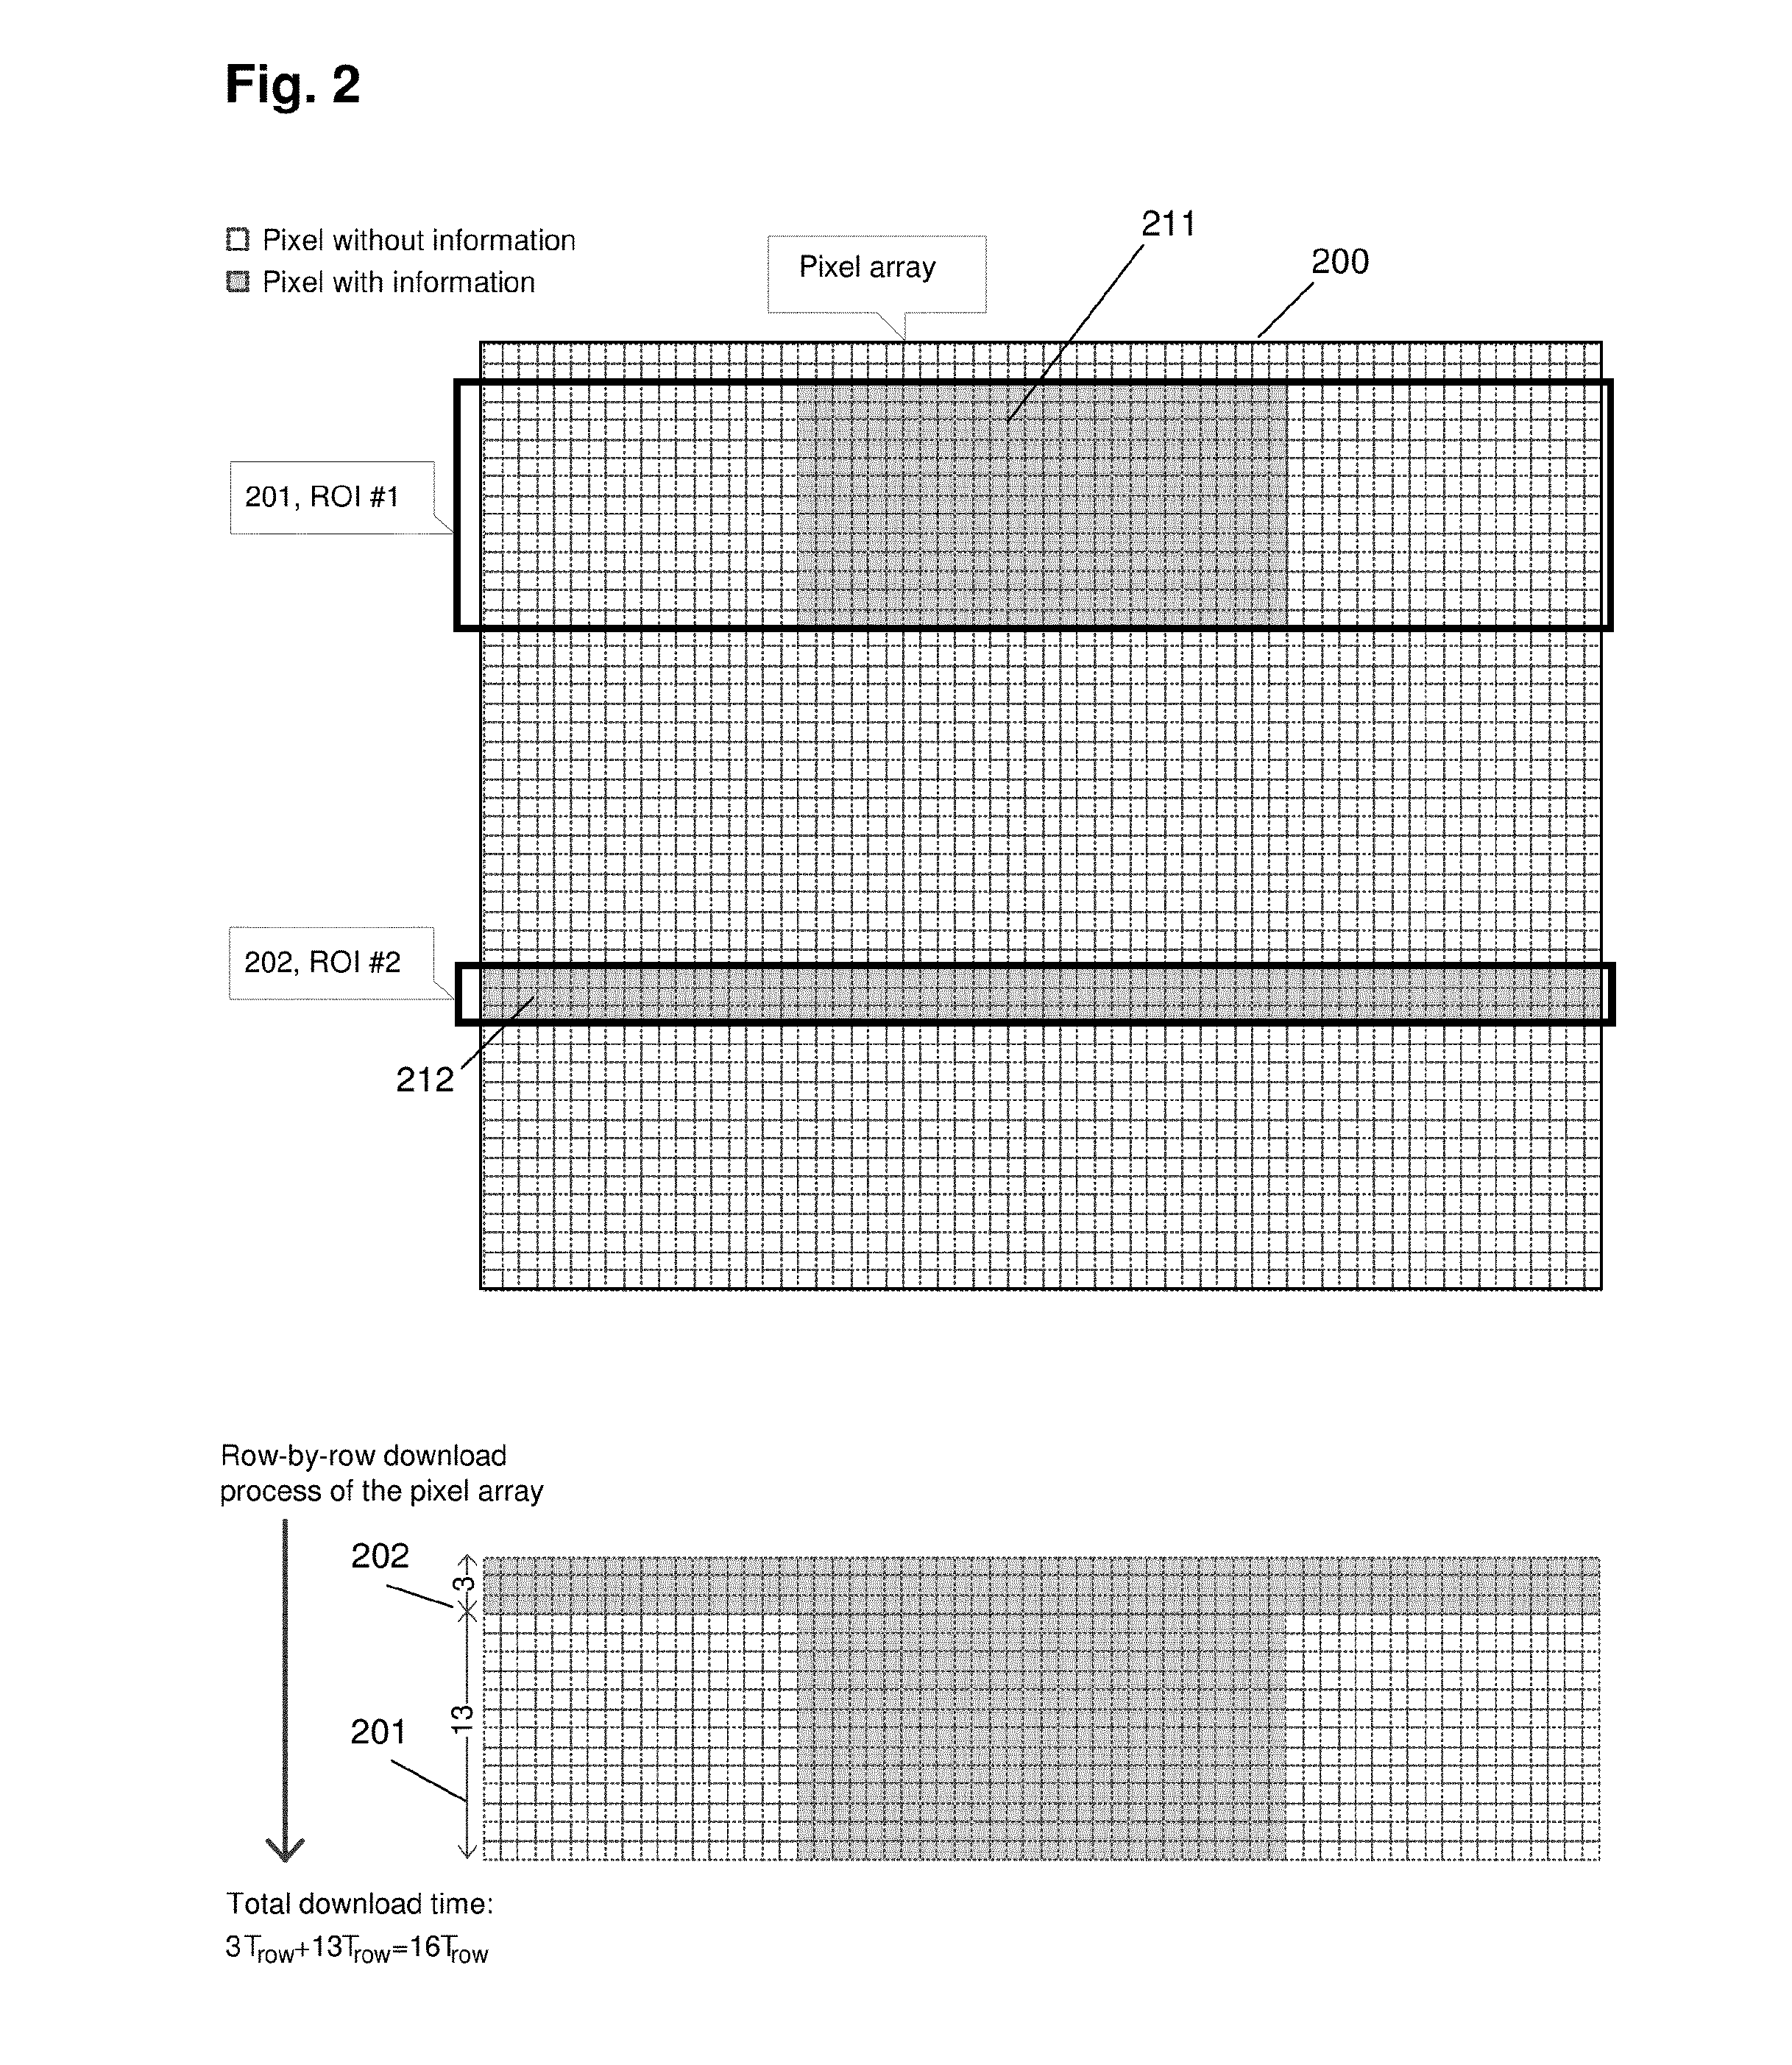 Automatic region of interest function for image sensors